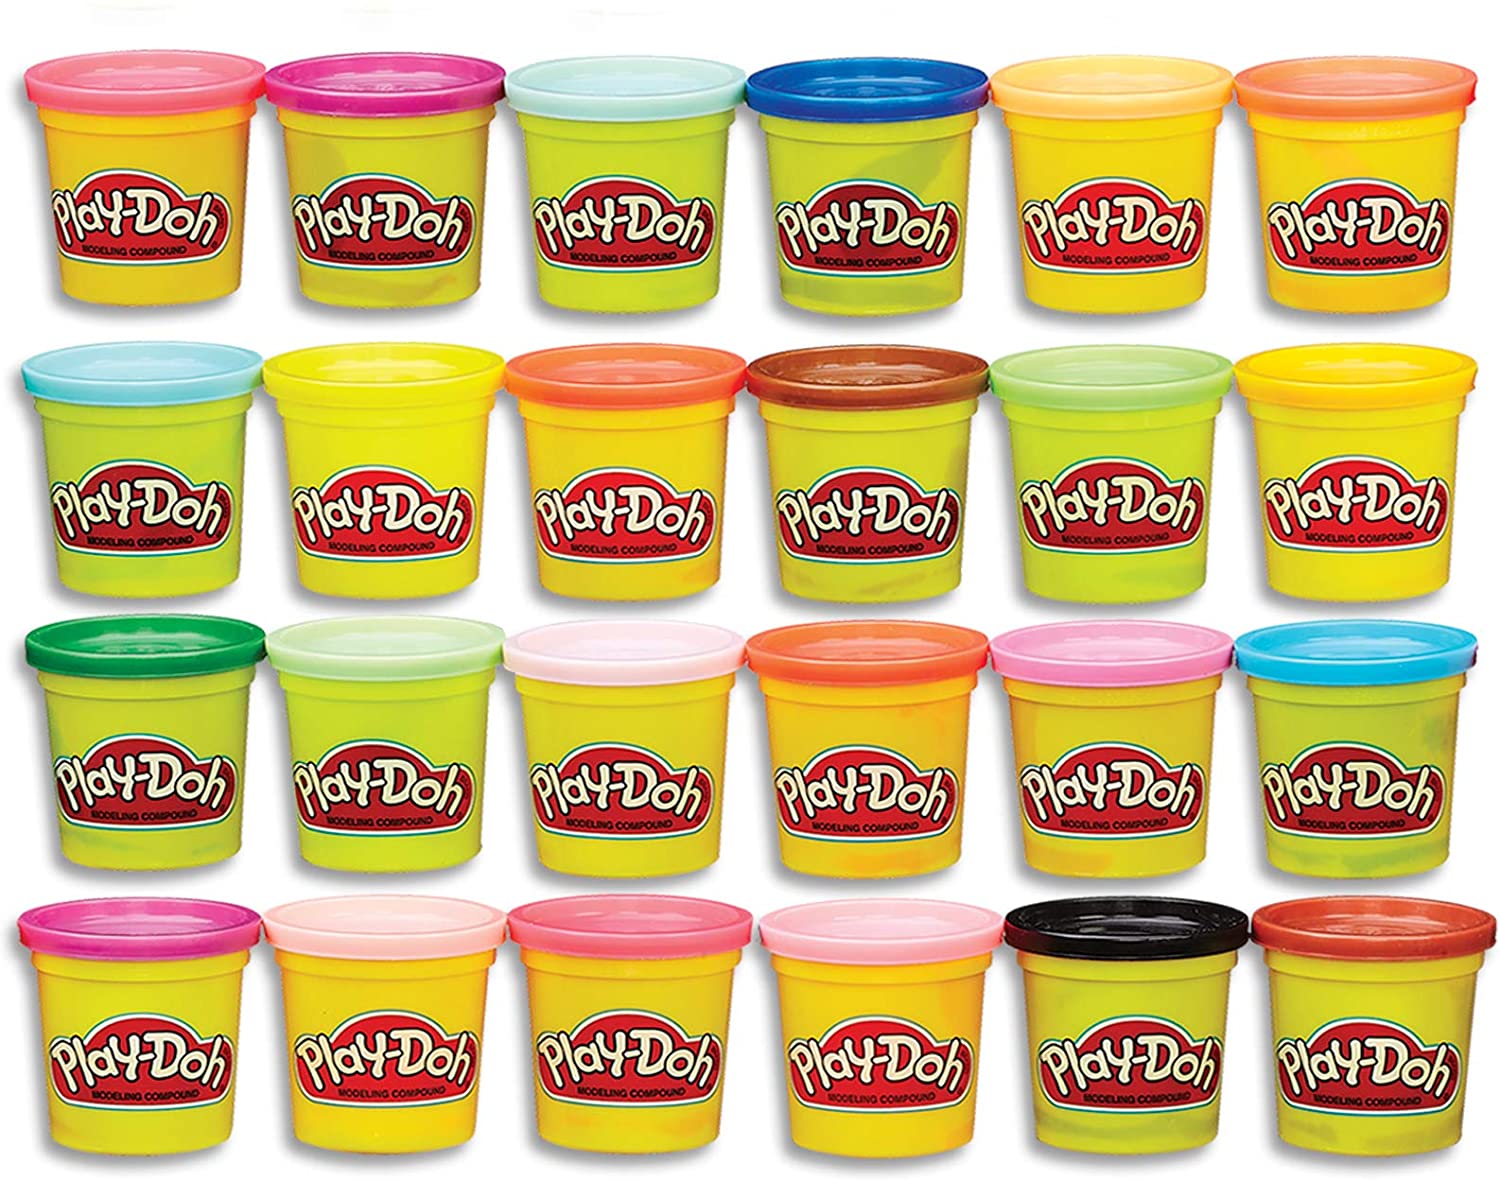 Play-Doh Modeling Compound, 24 Pack of Colors, 3 Oz Cans